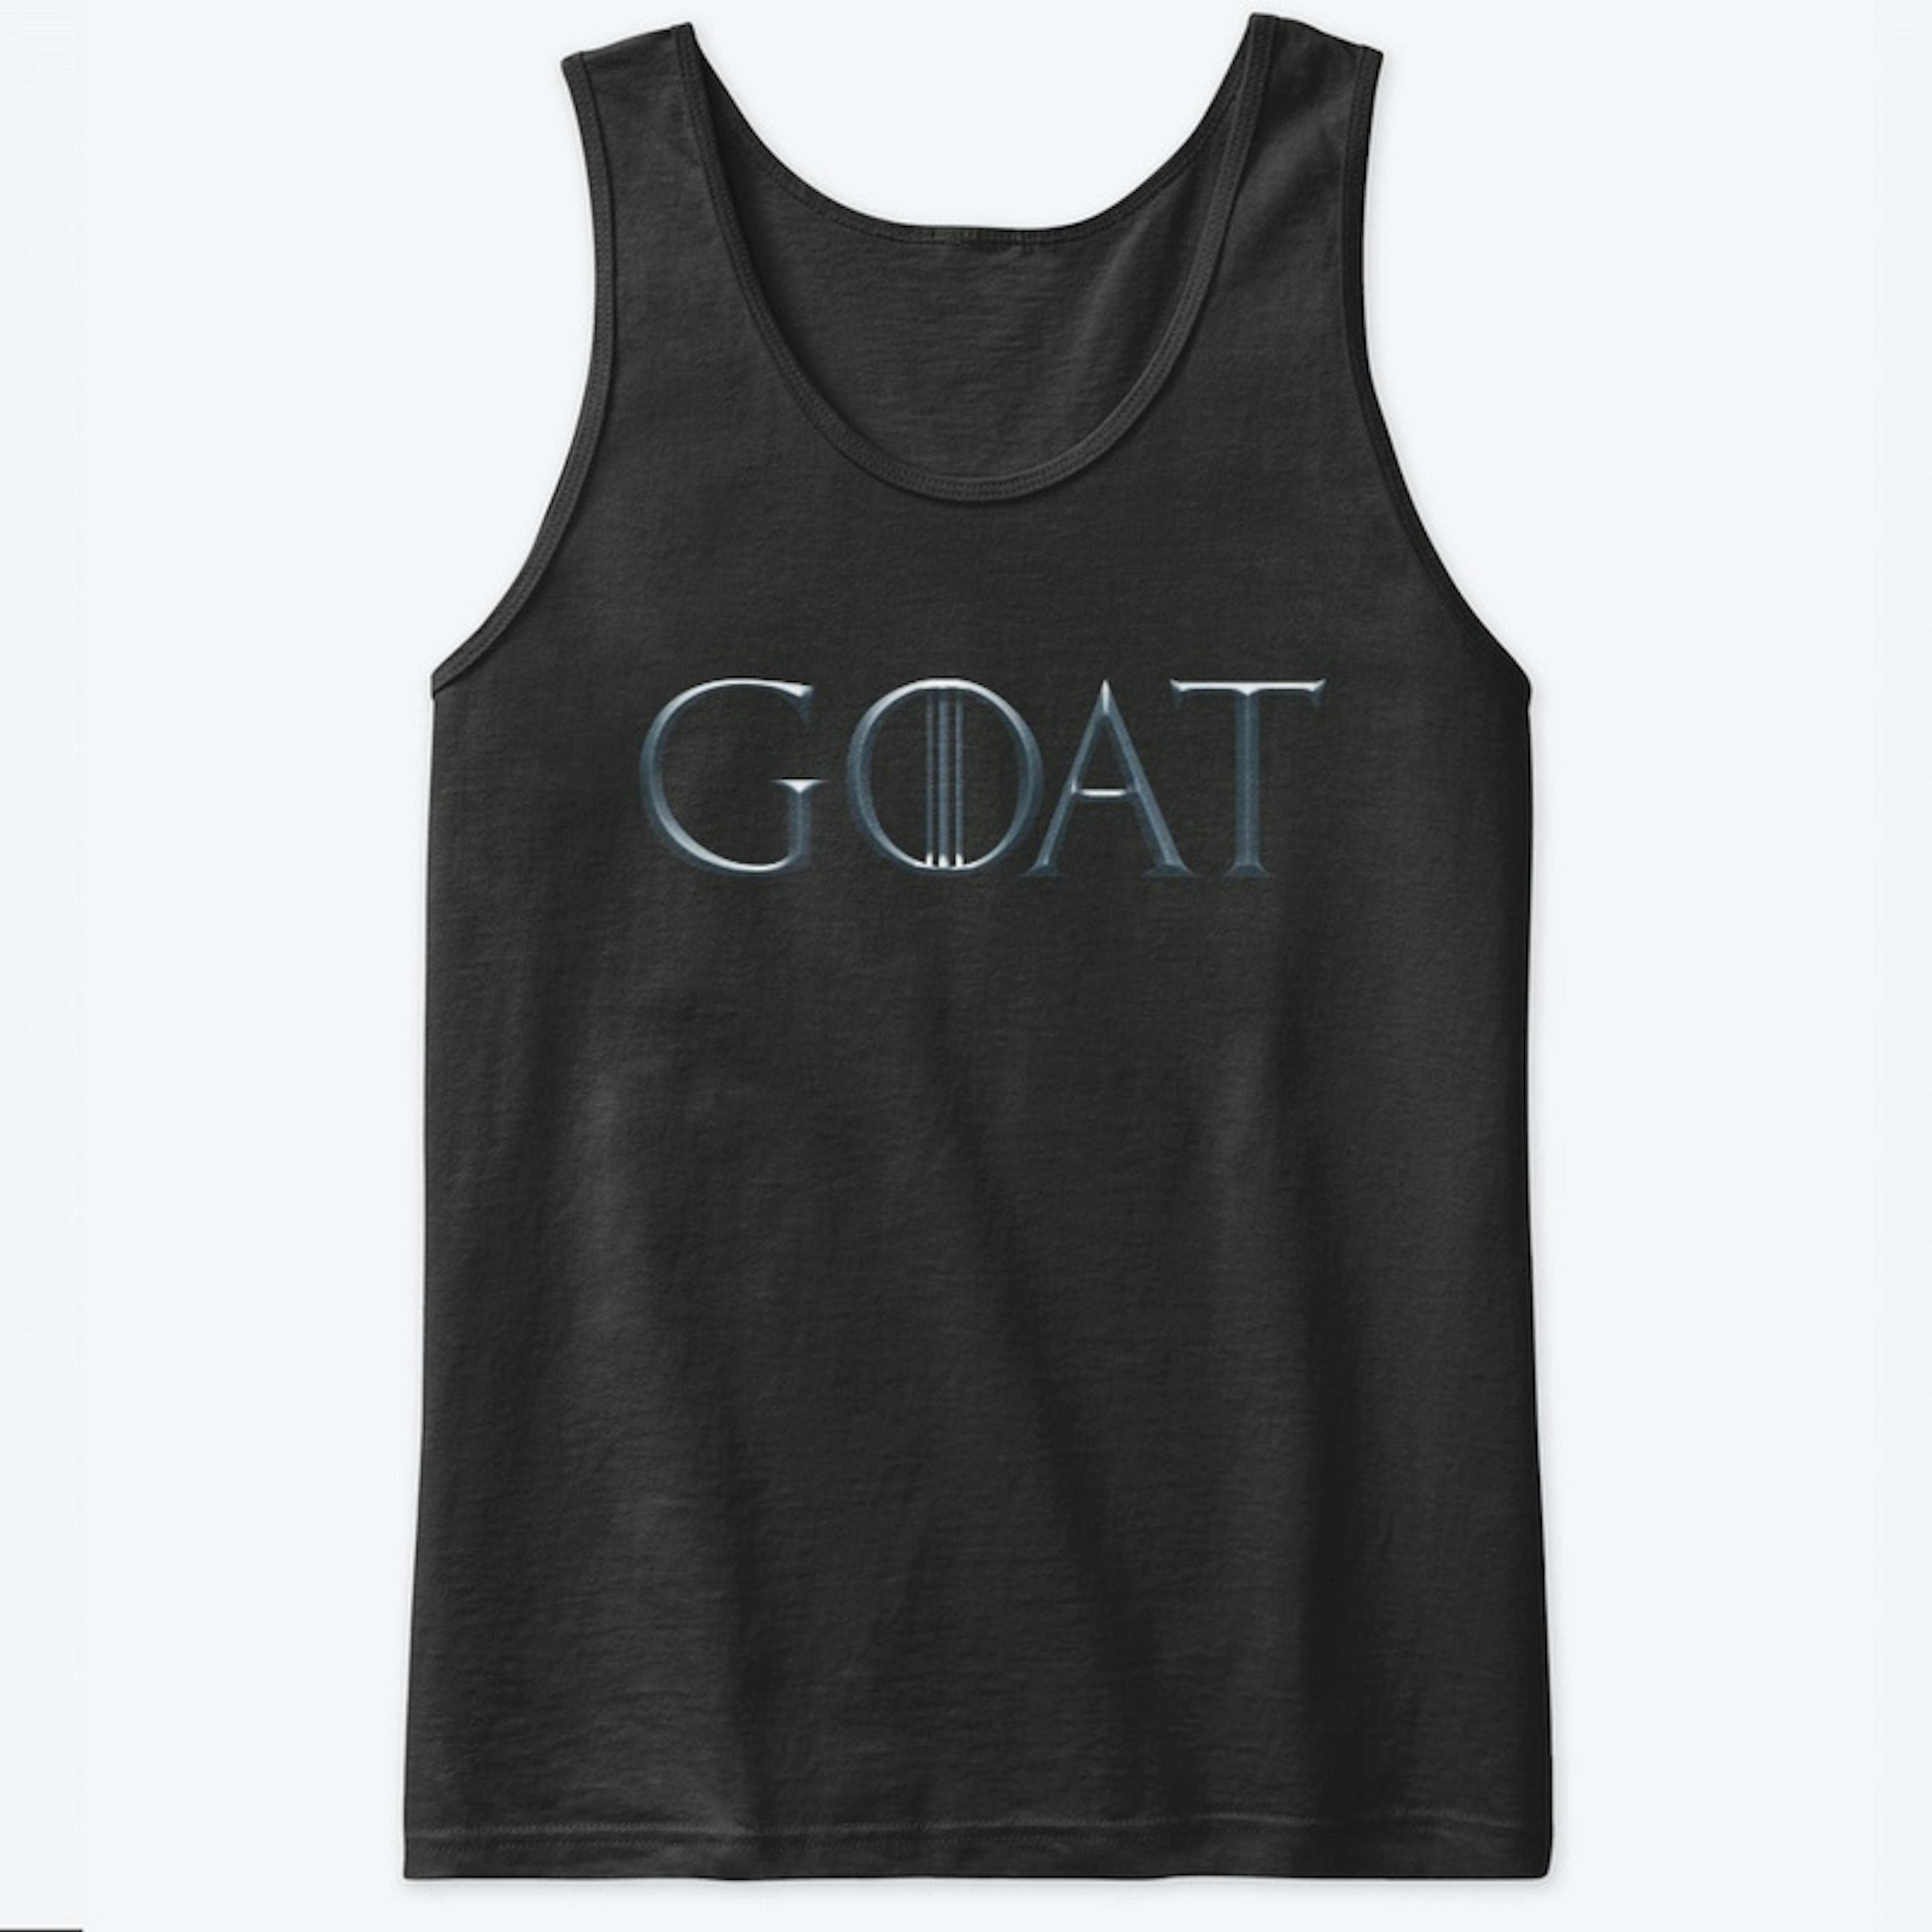 Game of Goats